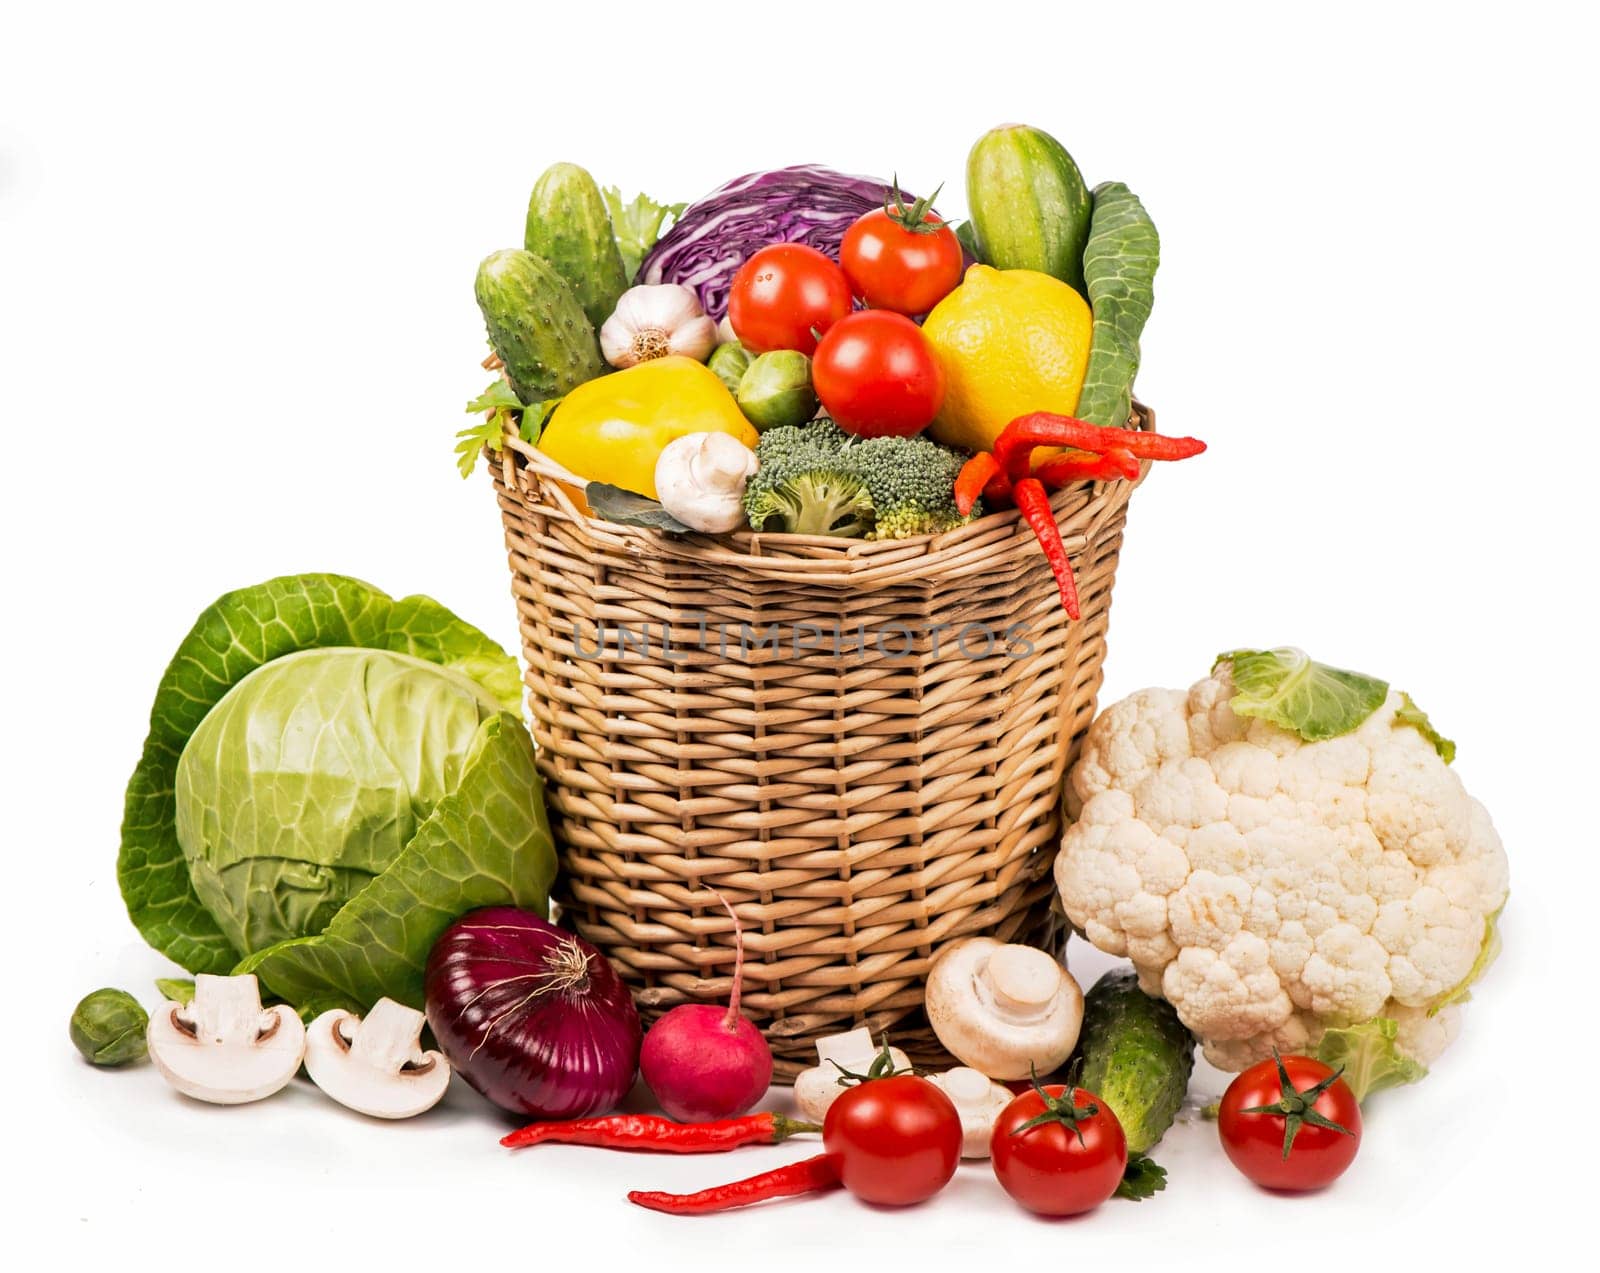 Fresh vegetables put in a wattled basket. Collection of fresh vegetables. Vegetarian diet food. fresh vegetables isolated on white. Tomatoes, broccoli, peppers, mushrooms - products for the organic market by aprilphoto